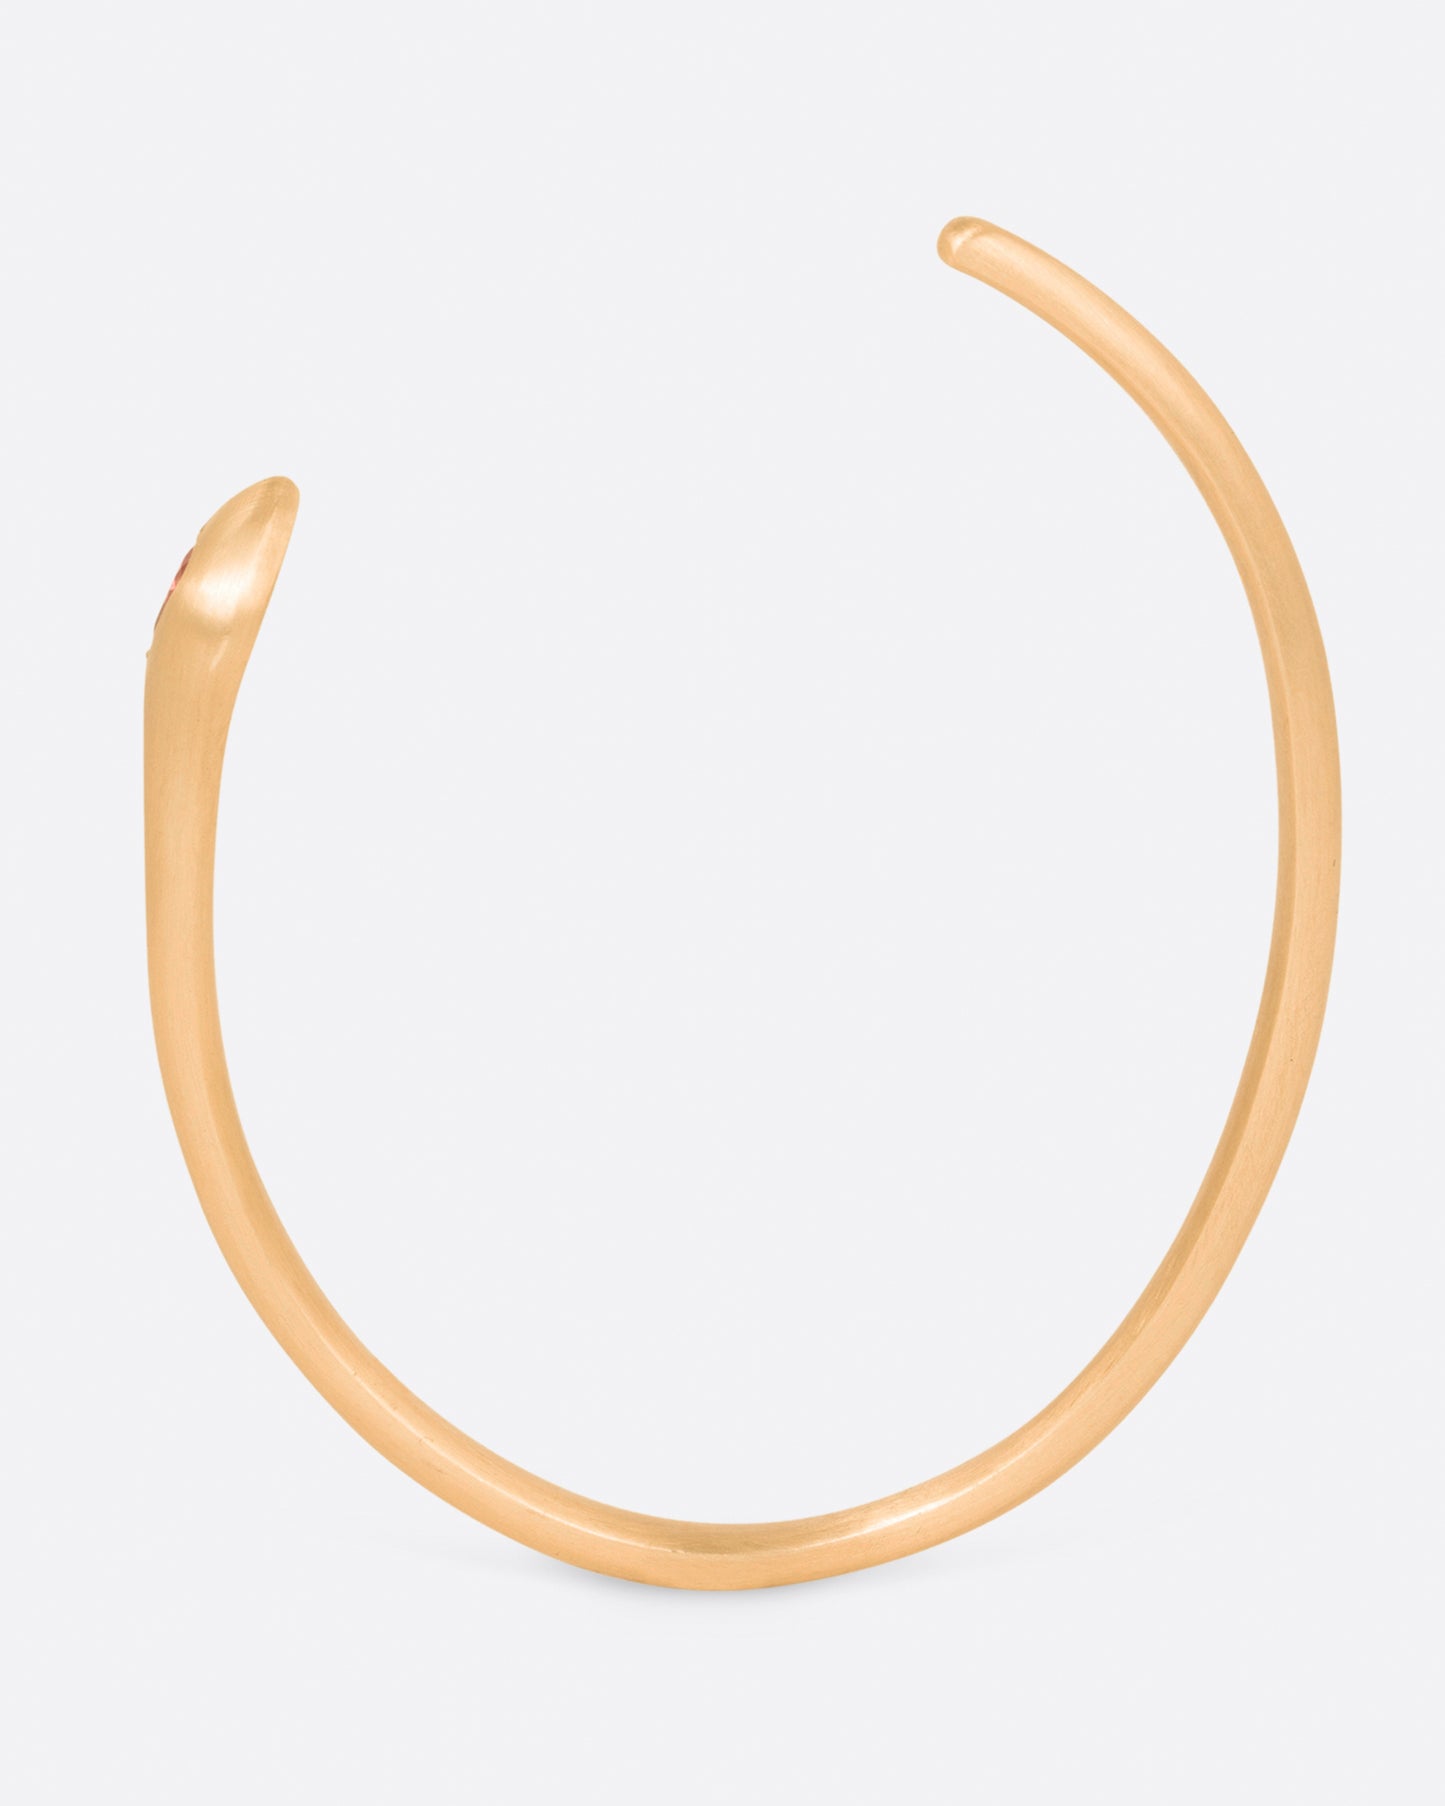 A matte yellow gold snake cuff bracelet with a pear shaped pink sapphire on its head, shown standing up, from the side.